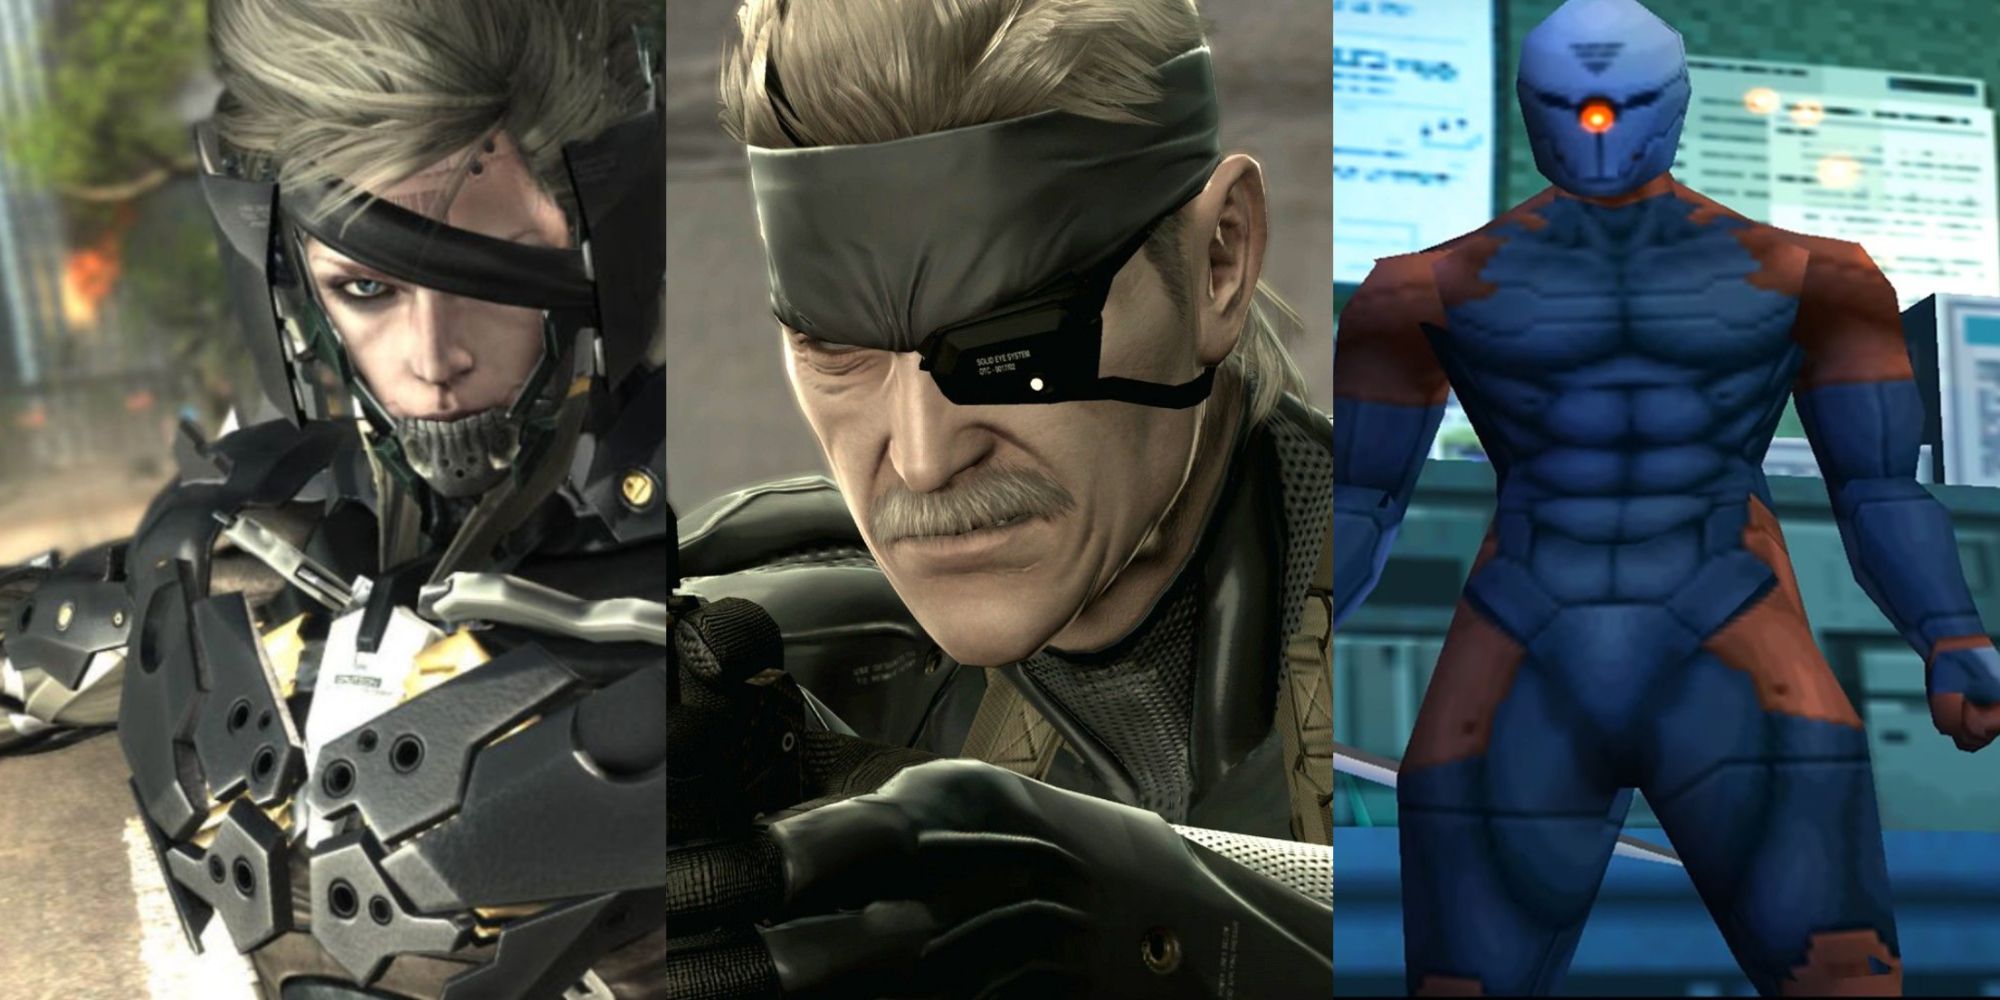 Metal Gear Solid at 25: 'It played a big part in making games grow up', Games